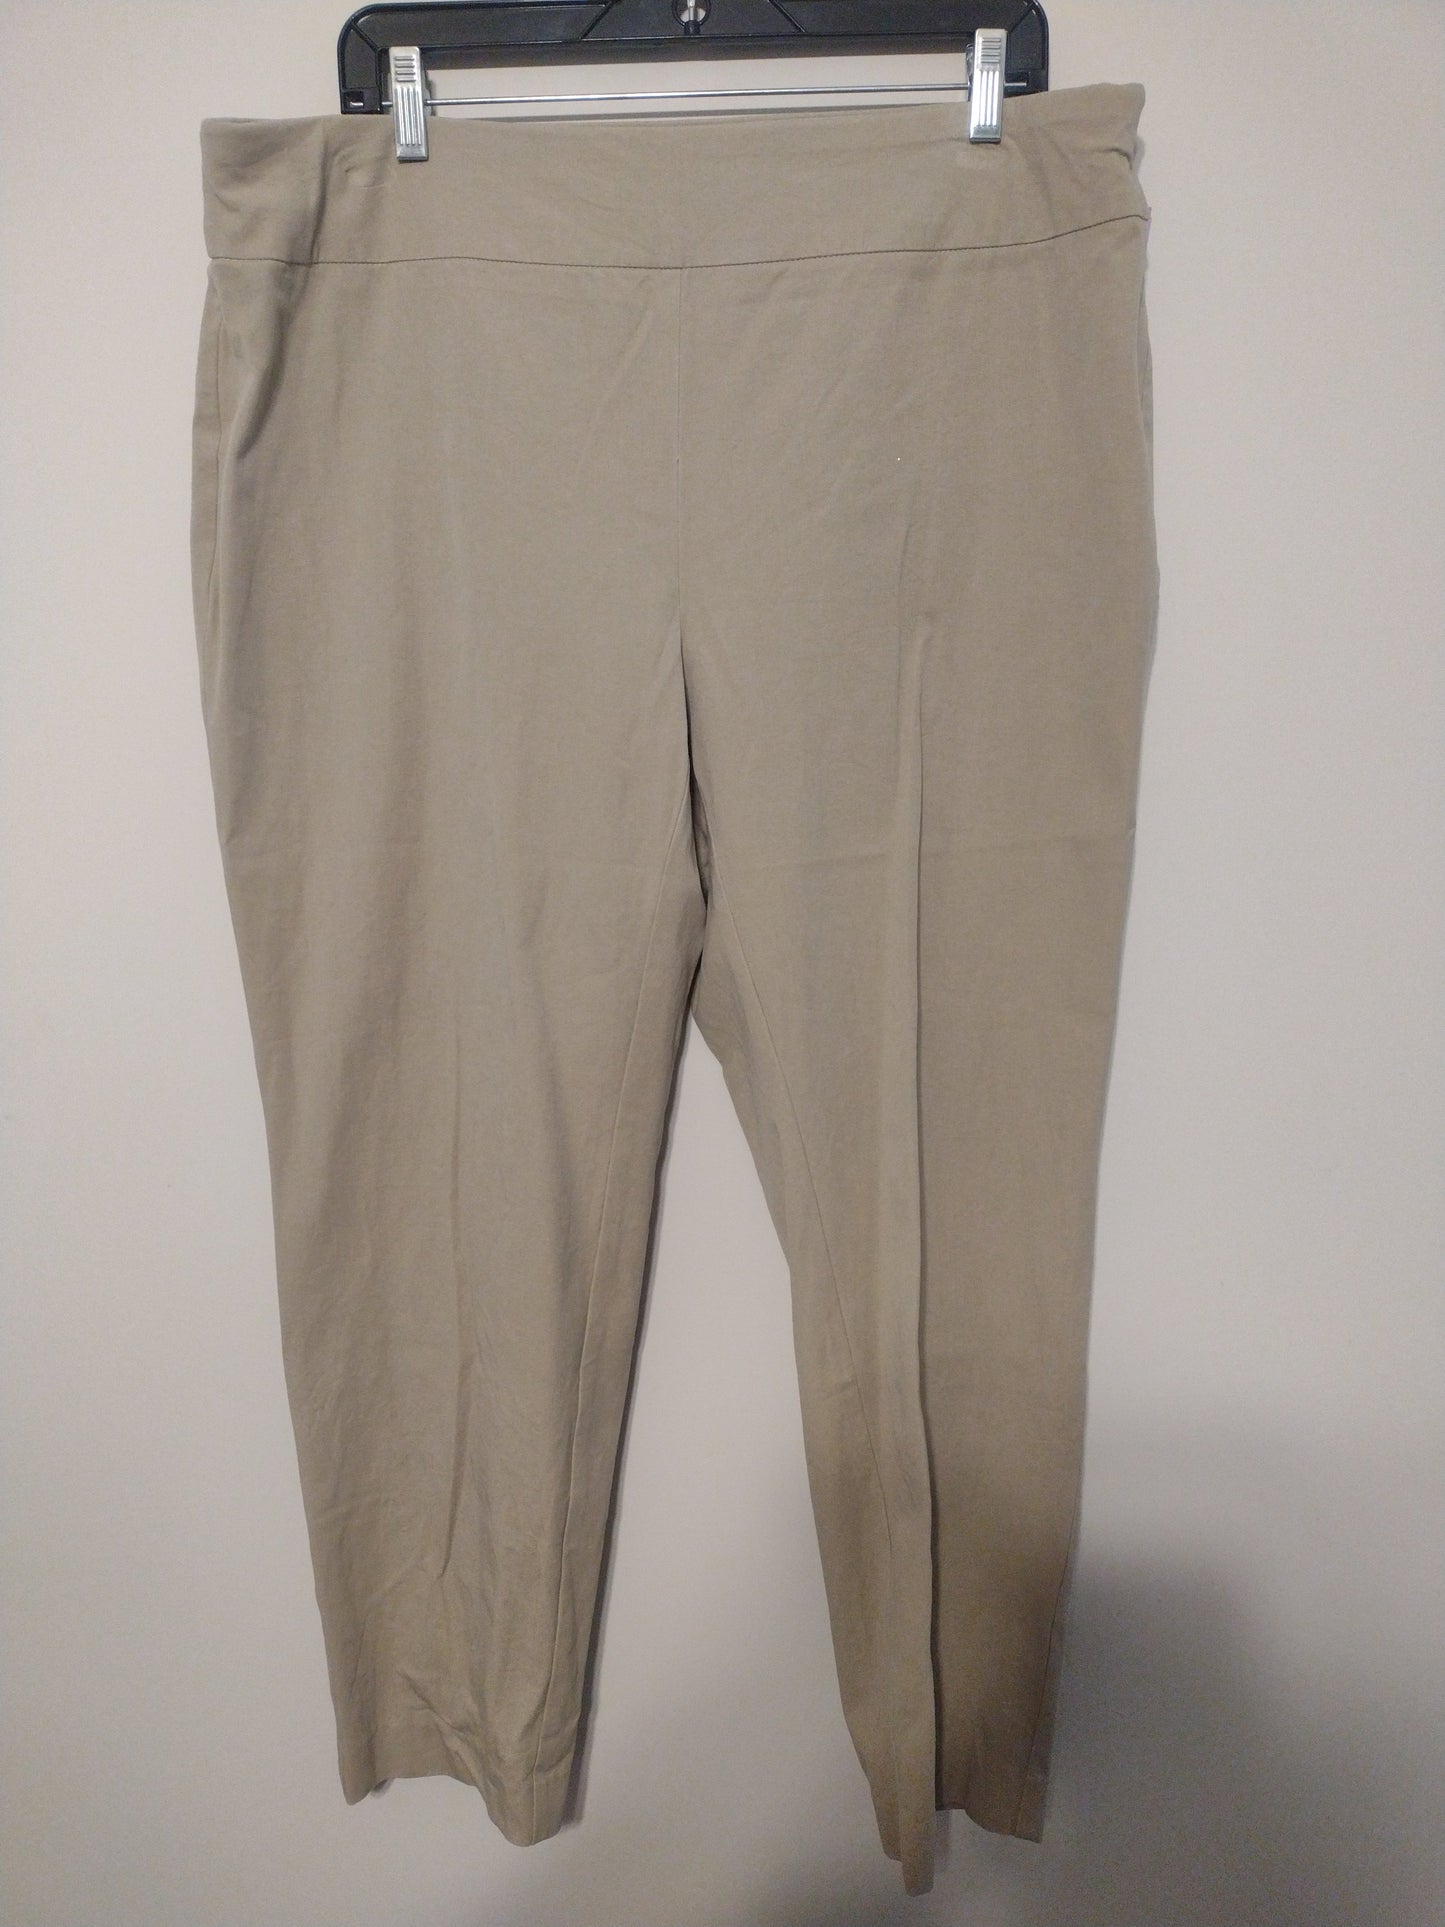 Pants Ankle By Crown And Ivy  Size: 18